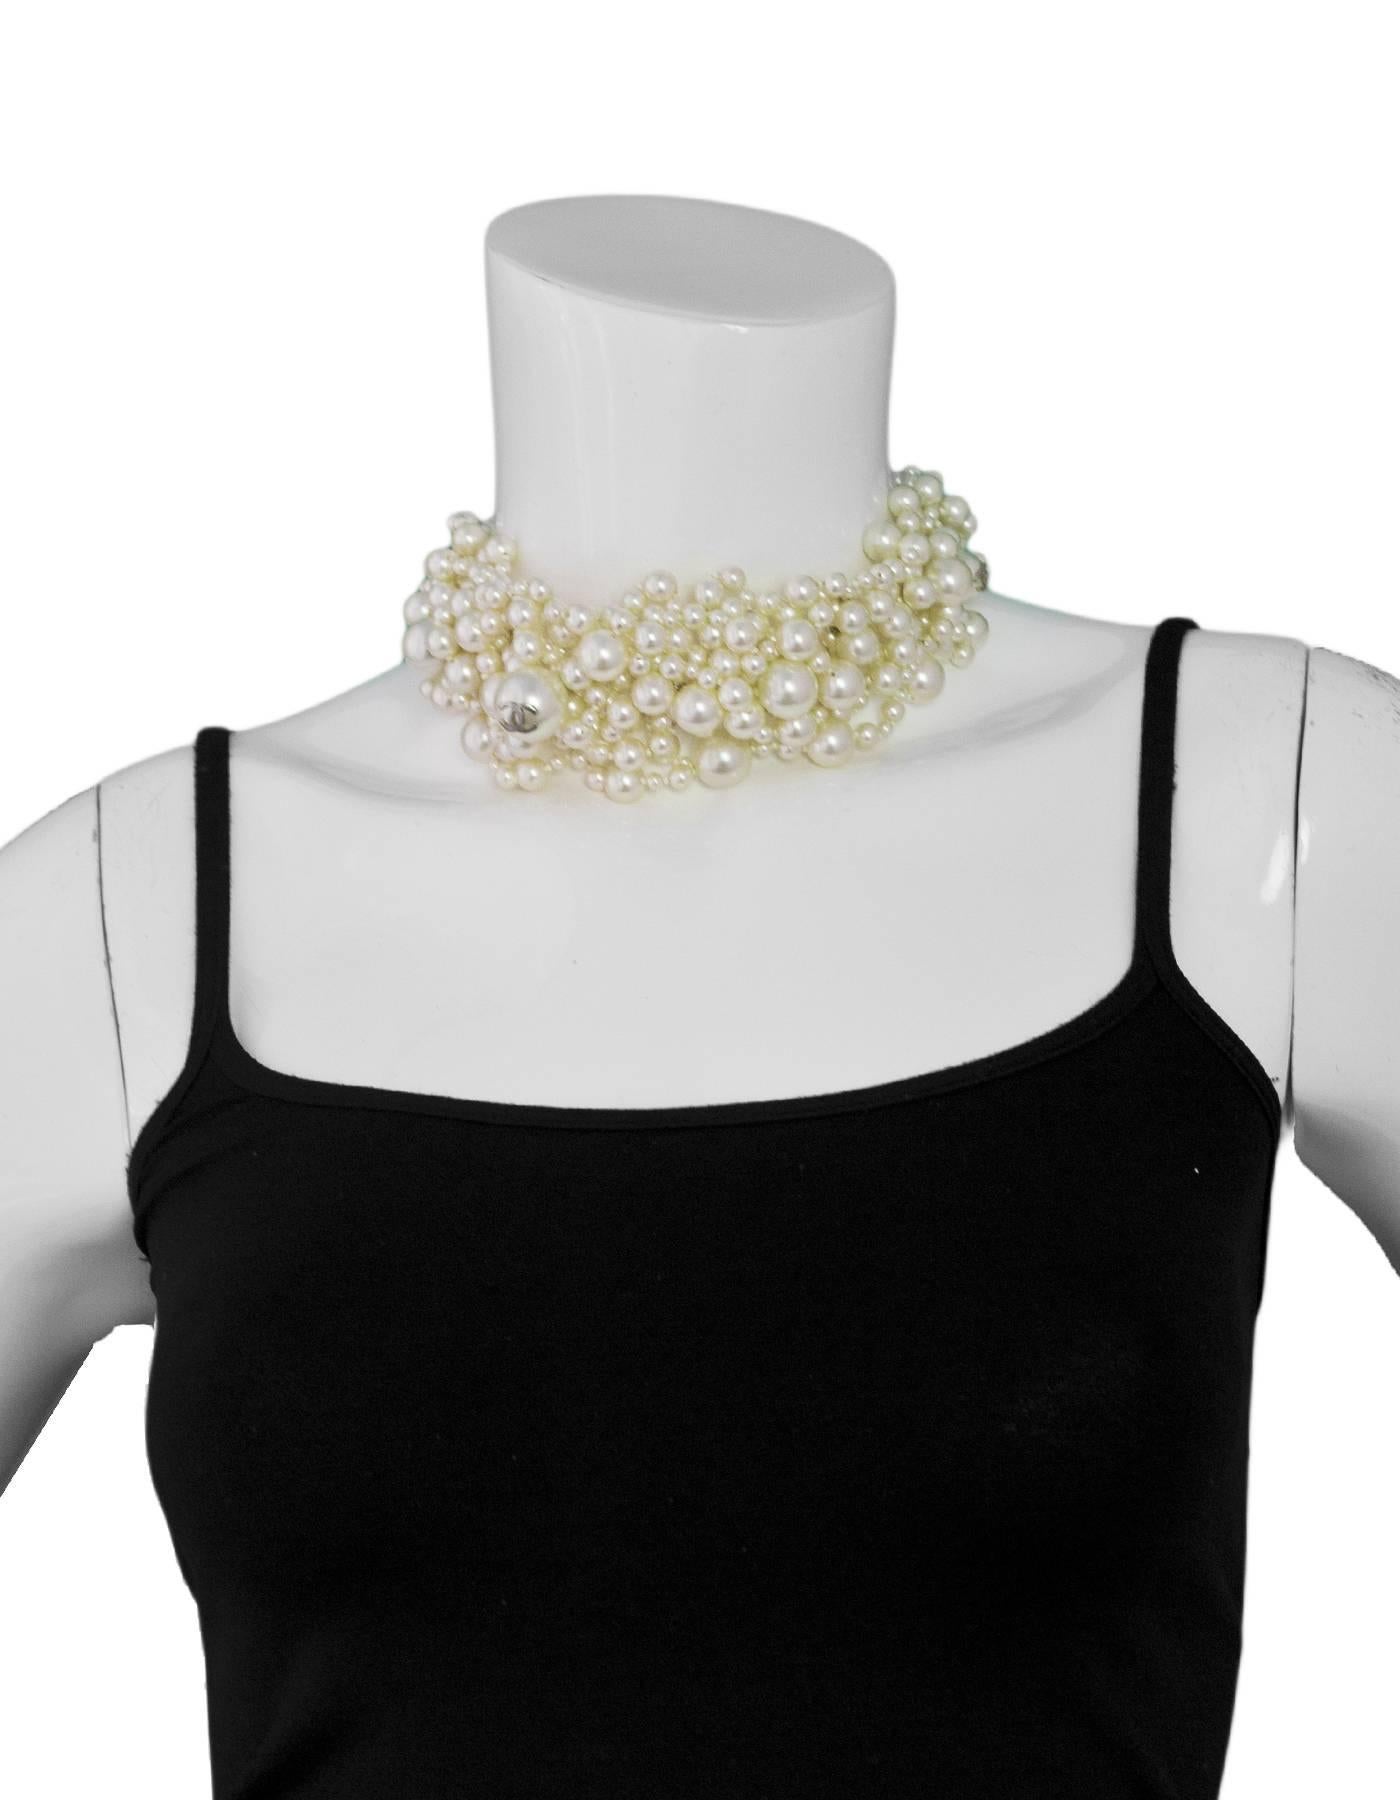 Chanel Ivory Faux Pearl Bubble Choker Necklace

Made In: France
Year of Production: 2013
Color: Ivory and silvertone
Materials: Metal, faux pearl
Closure: Lobster claw closure
Stamp: Chanel 13CCS Made in France
Overall Condition: Excellent pre-owned